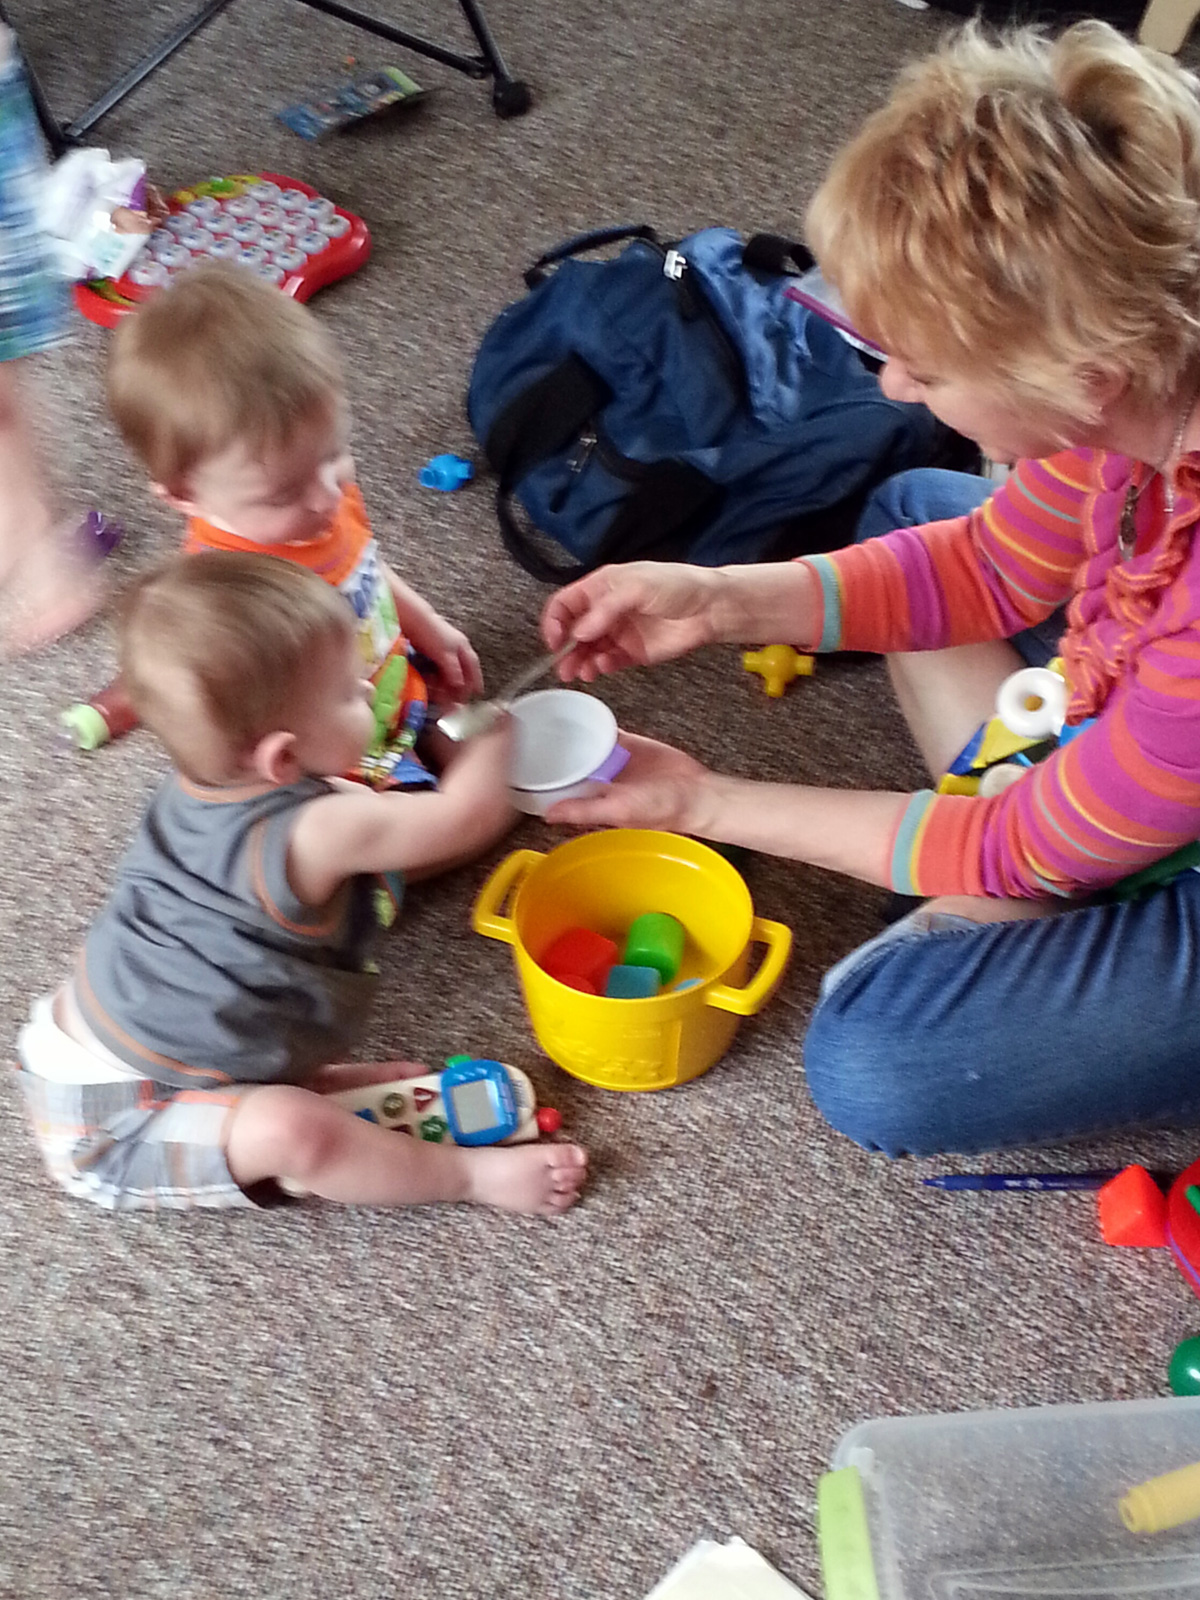 Wendy DeGeest works with two young boys in their Brainerd home. Most of her early childhood special education work is done in people's homes. Photo courtesy of Wendy DeGeest.